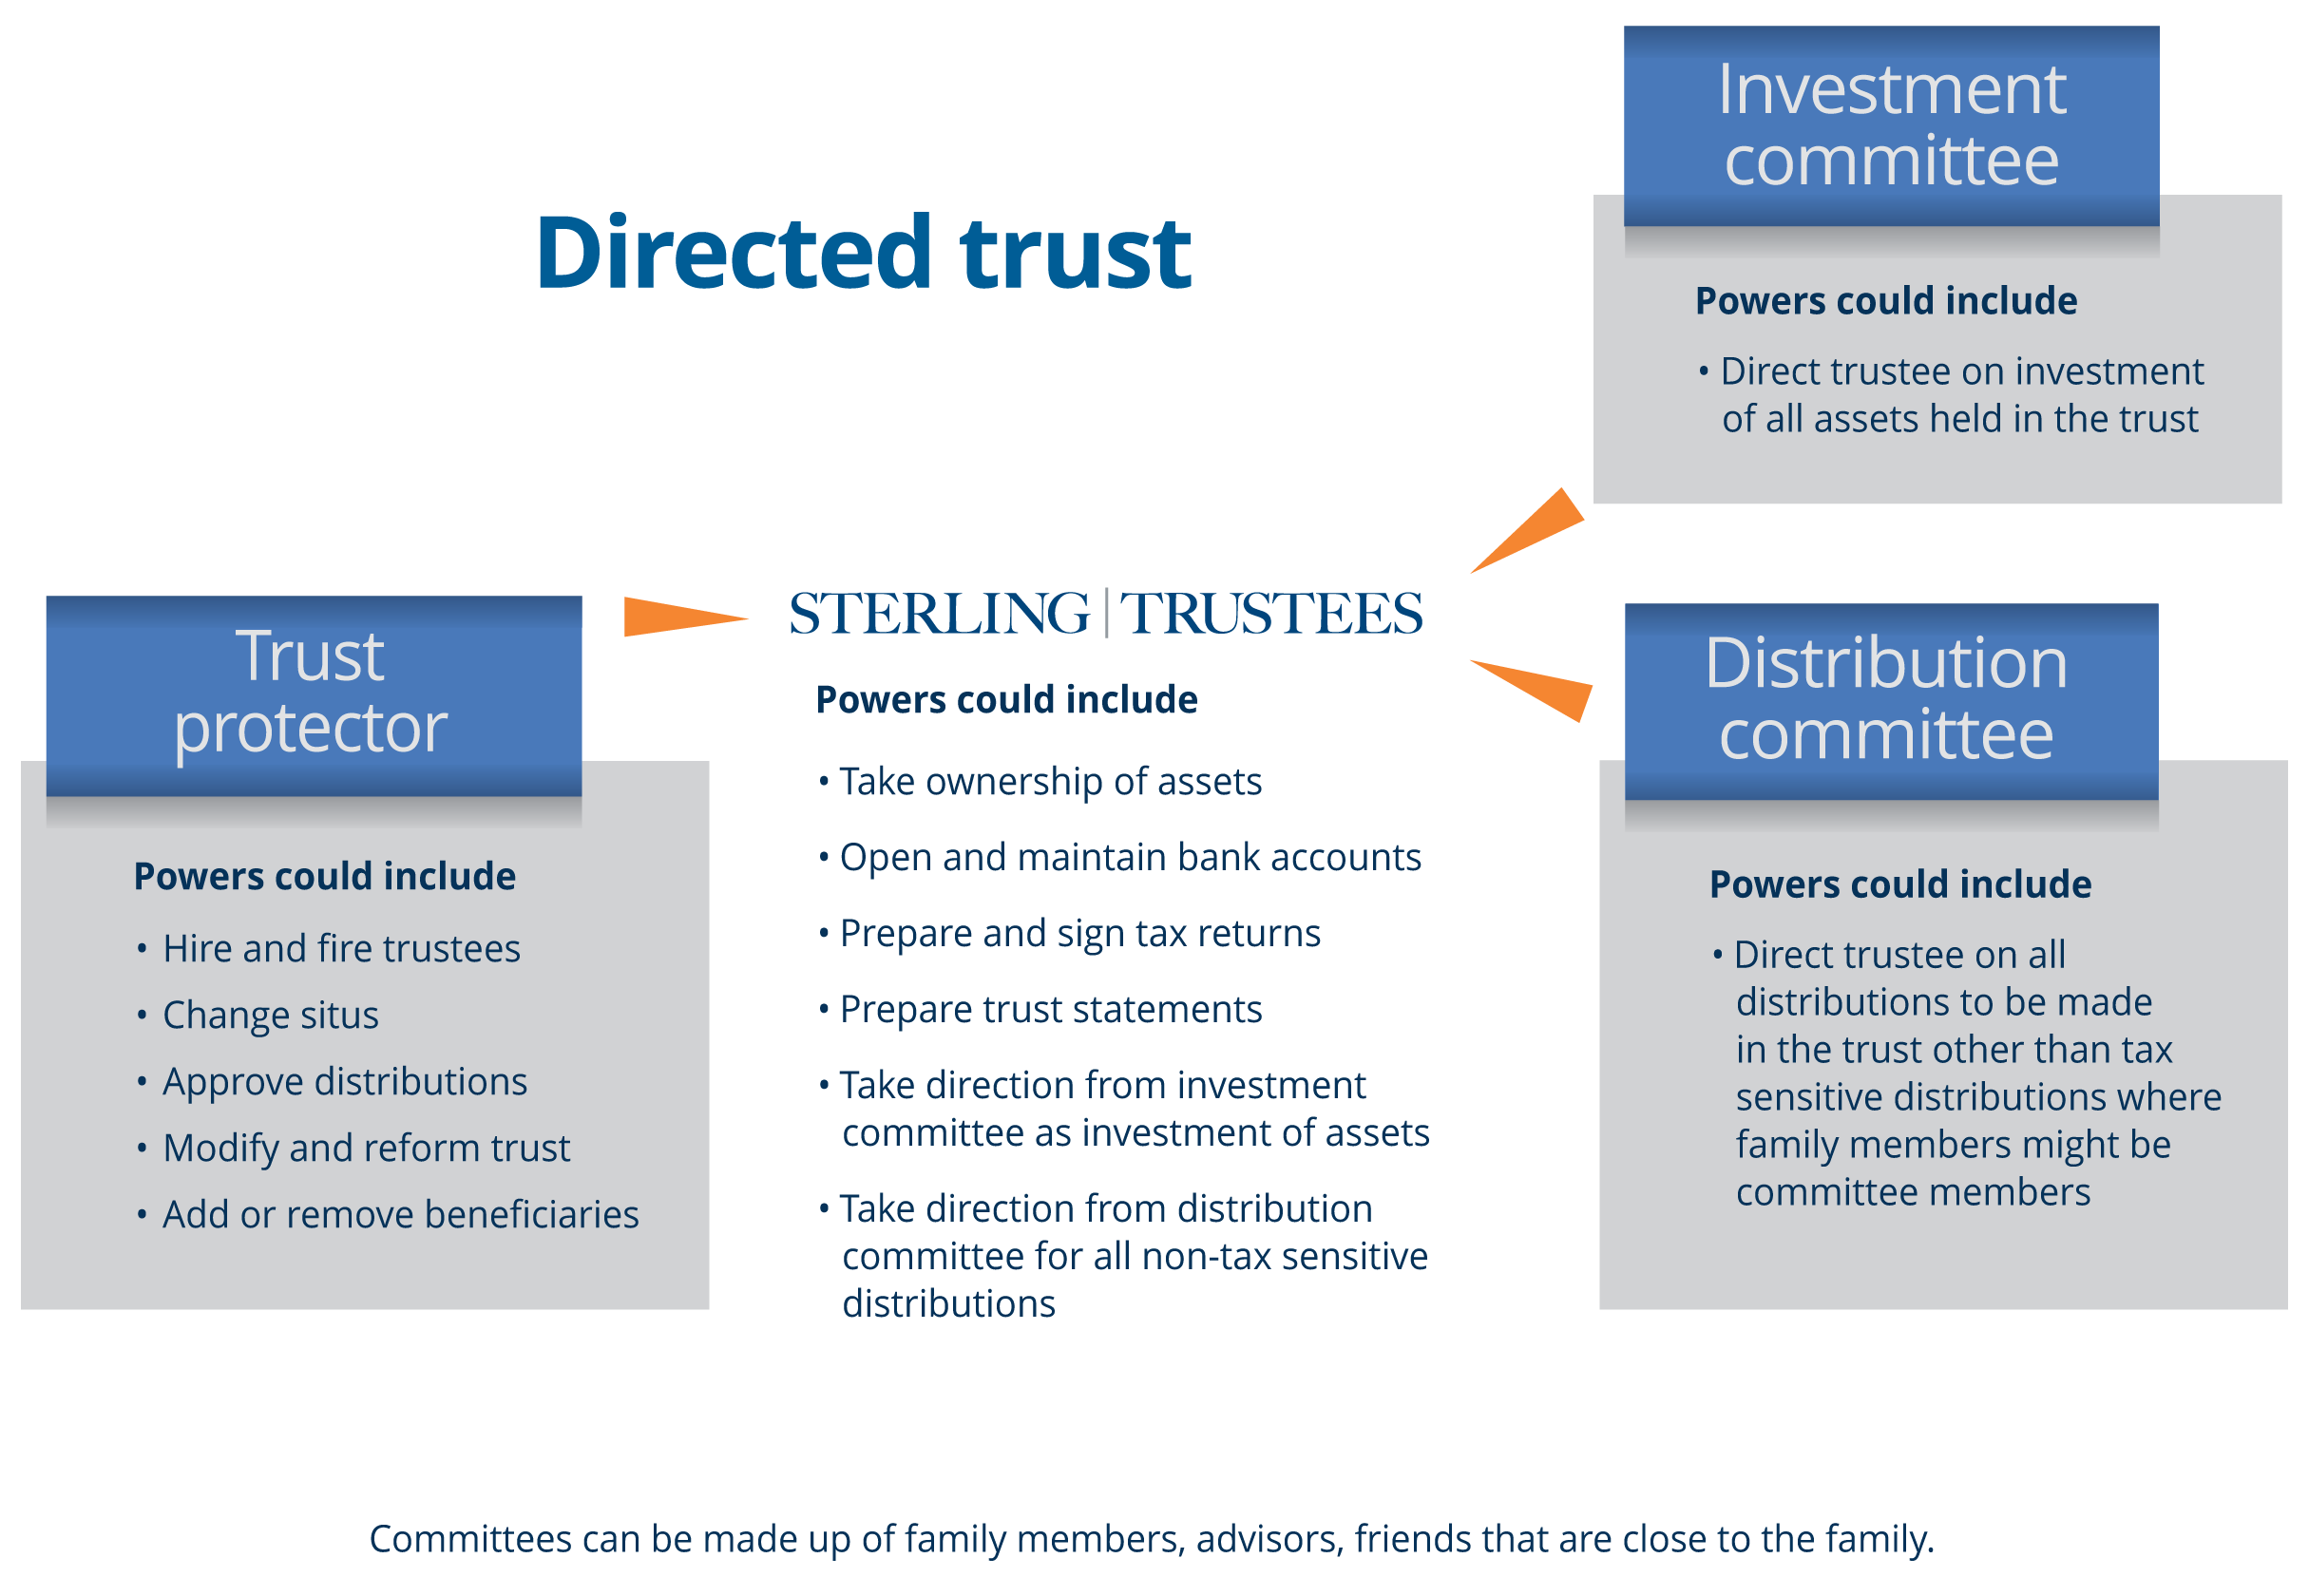 Illustrates the powers of trust protector, investment committee, distribution committee and Sterling Trustees in a directed trust